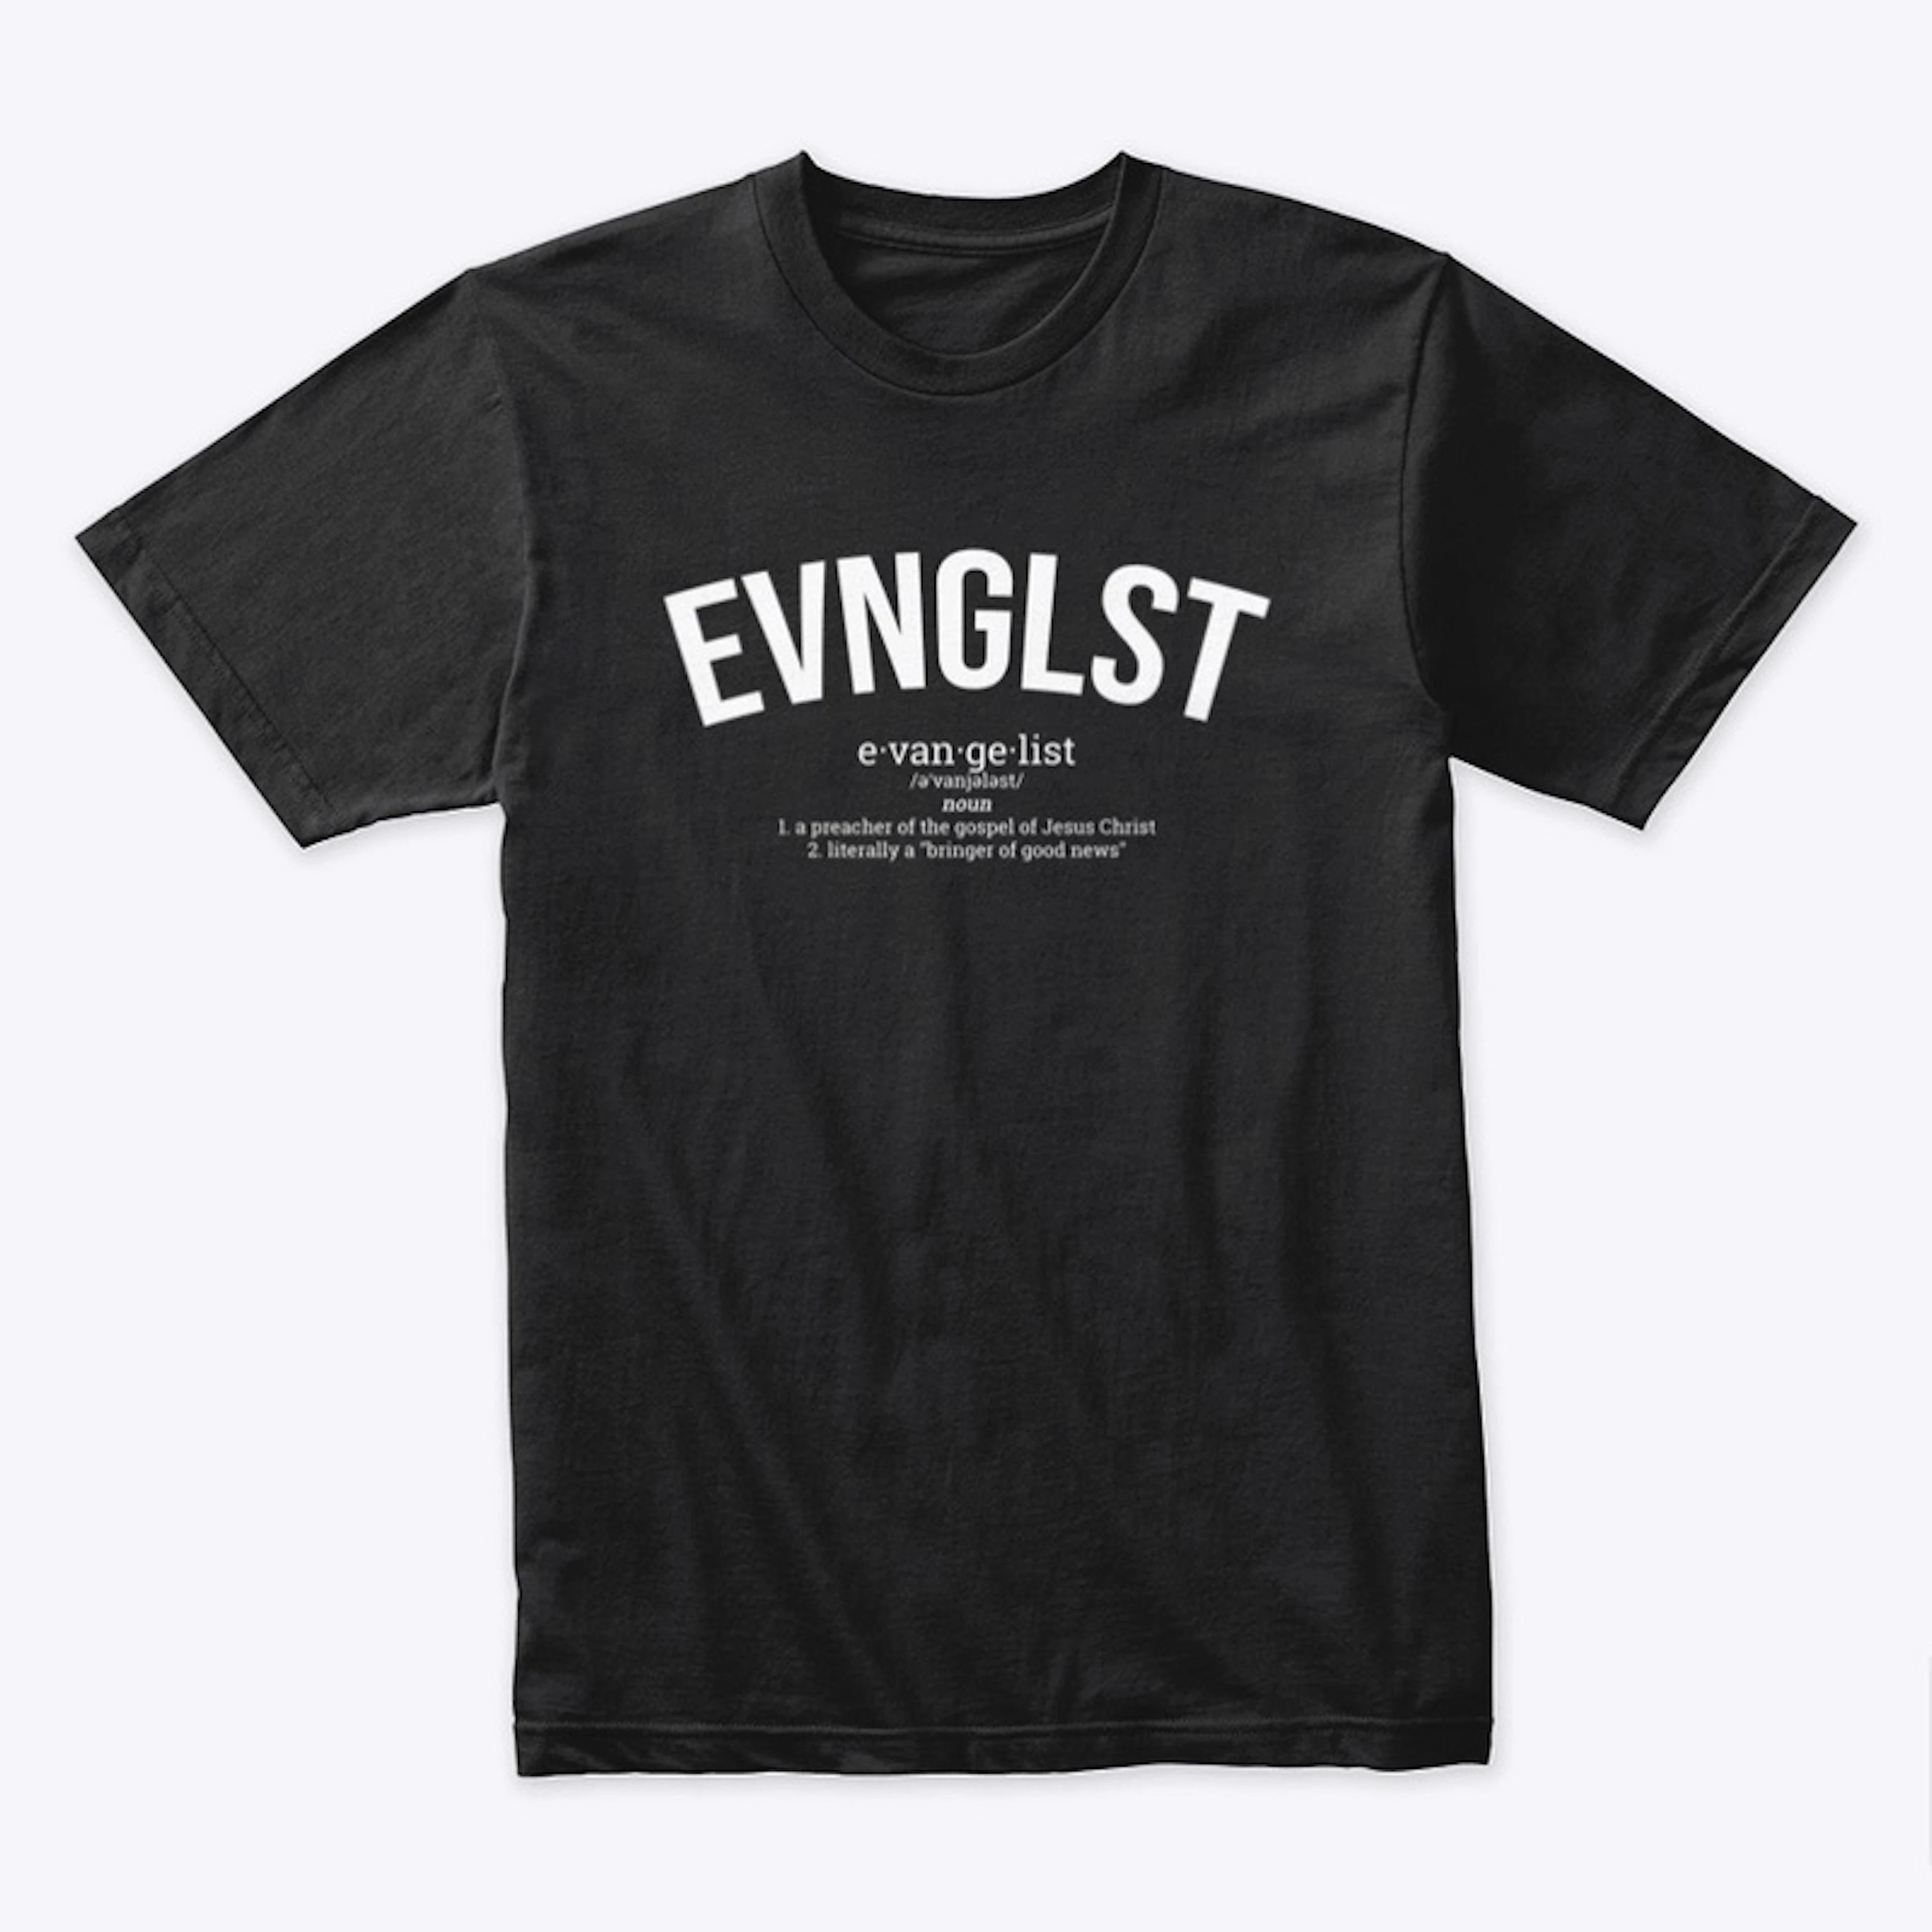 EVNGLST (Definition Collection)